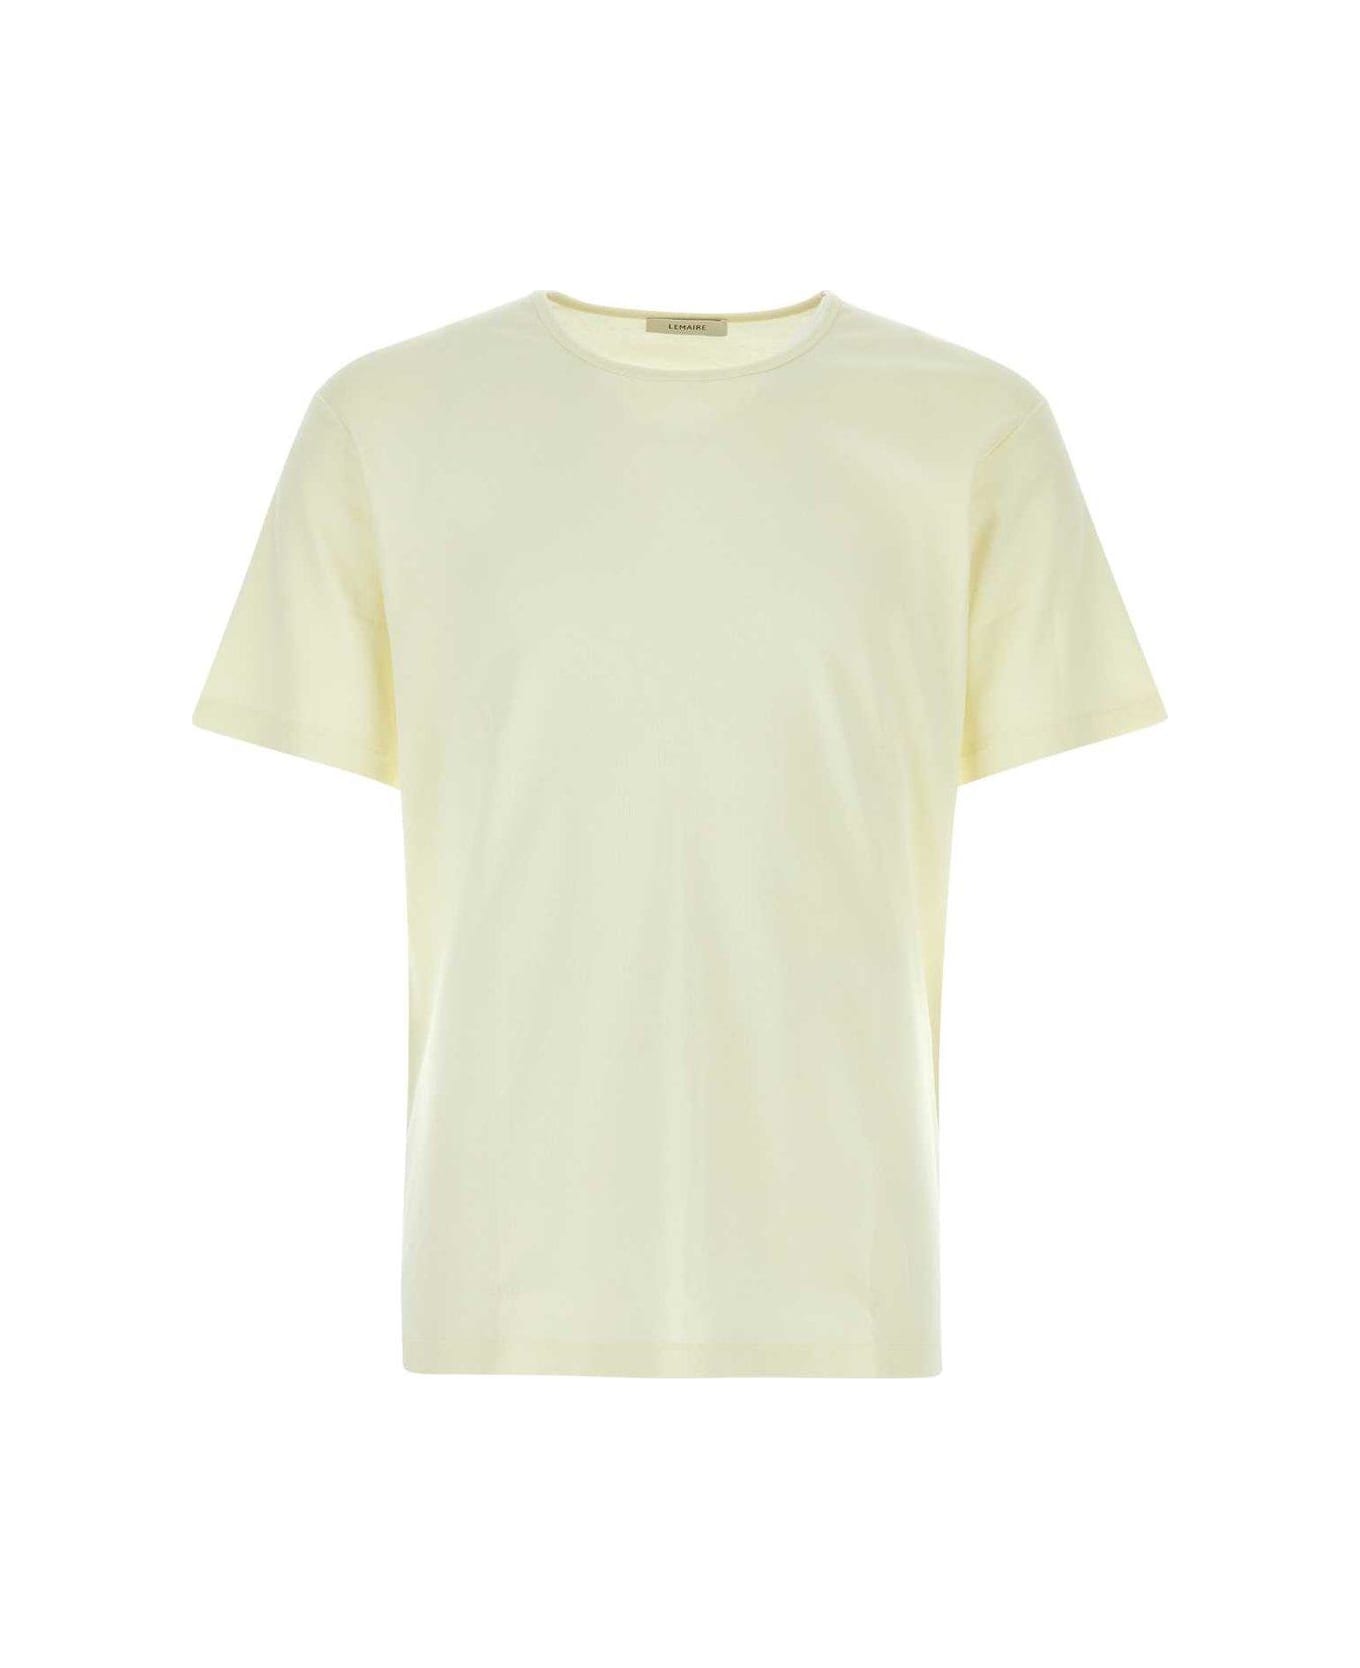 Lemaire Relaxed Fit Crewneck T-shirt - YELLOW